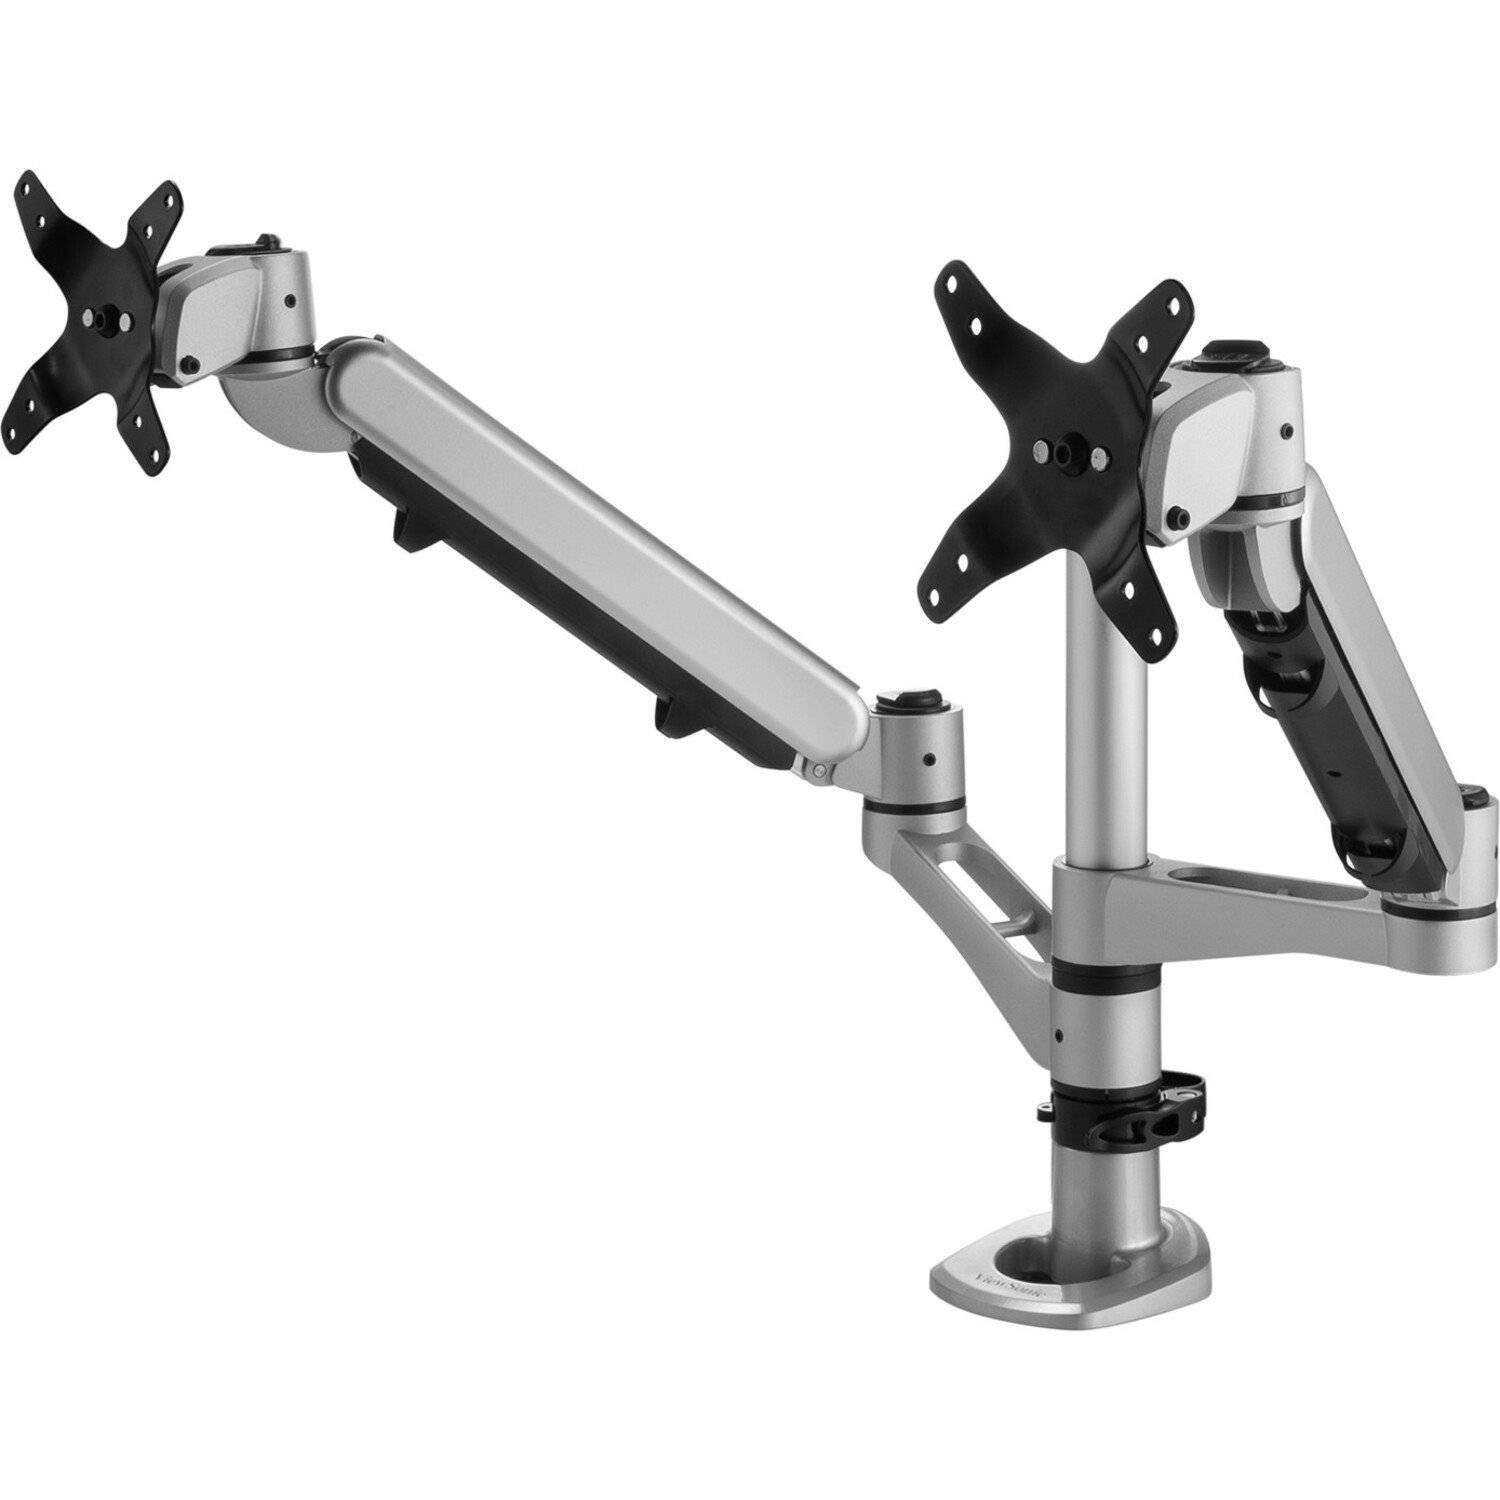 ViewSonic Spring-Loaded Dual Monitor Mounting Arm for Two Monitors up to 27" Each